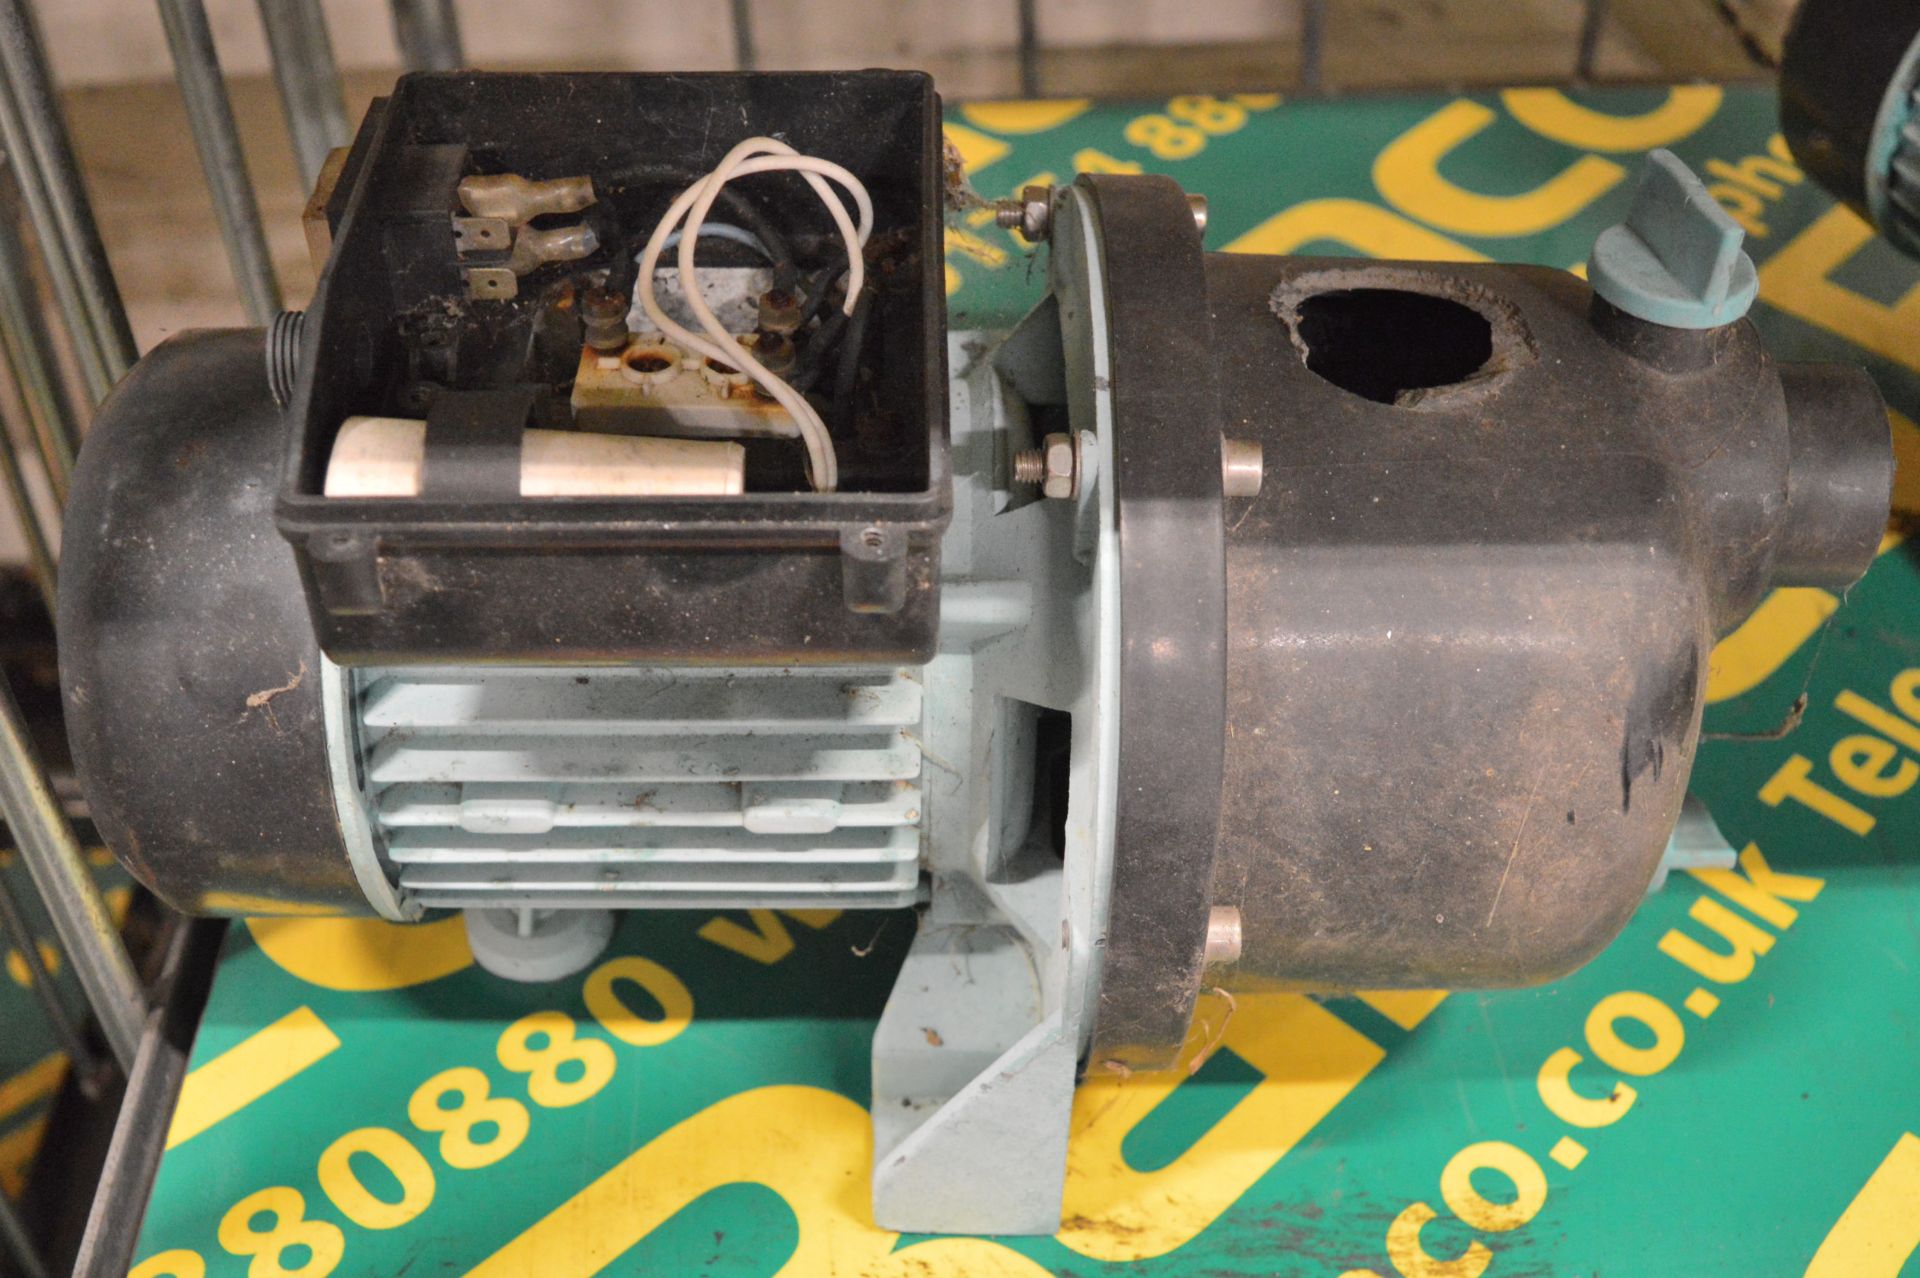 B&Q Jet Pump 800W - For Spares or Motor.